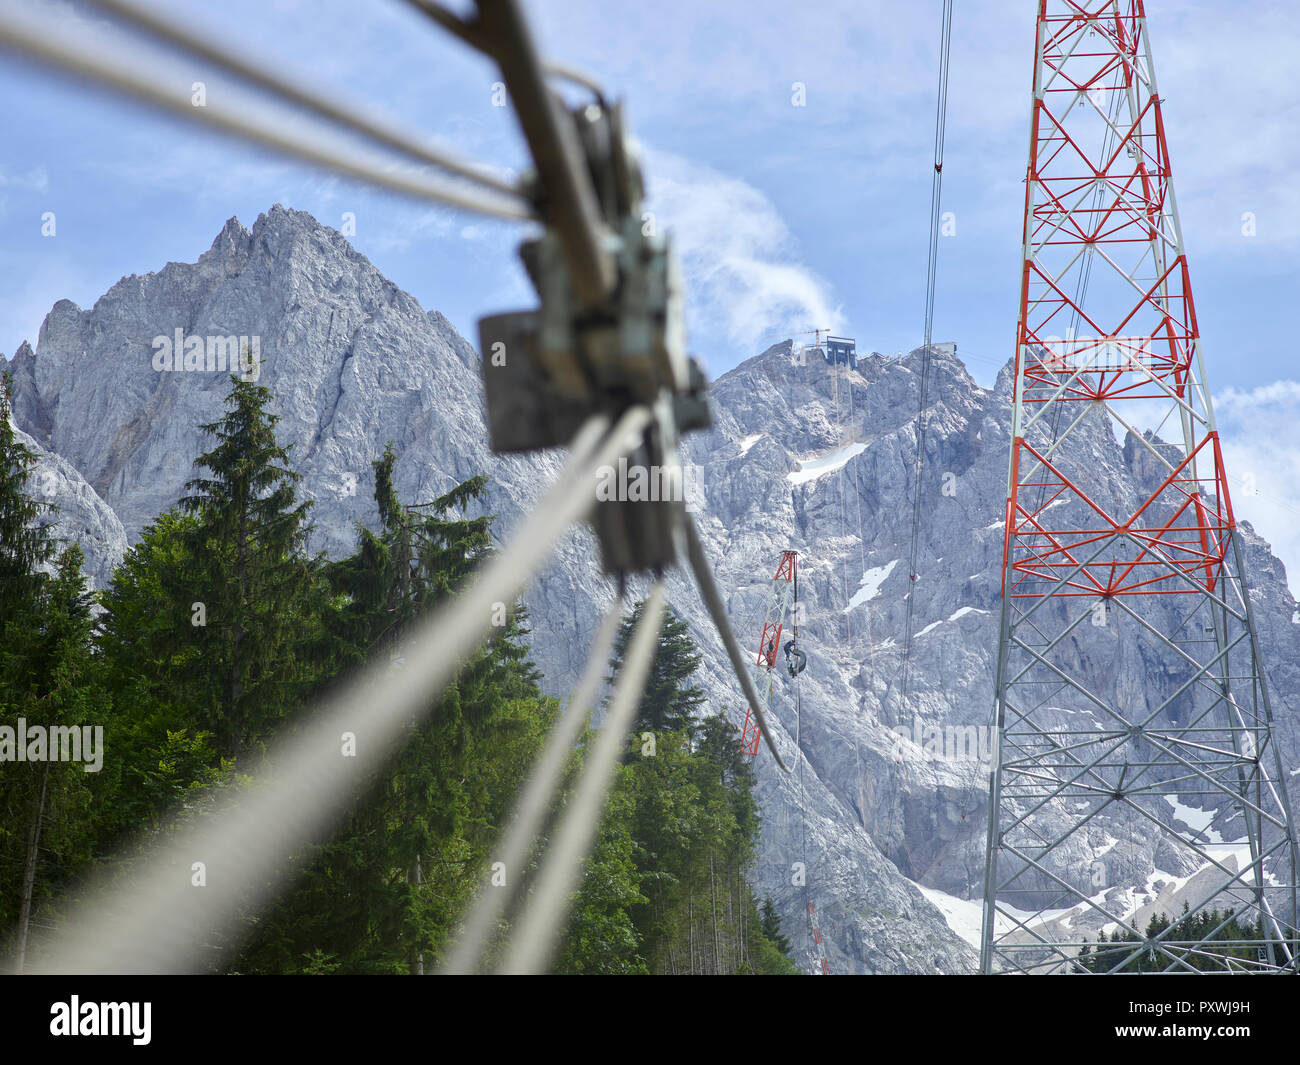 Germany, Bavaria, Garmisch-Partenkirchen, Zugspitze, installers working on poles of a goods cable lift Stock Photo